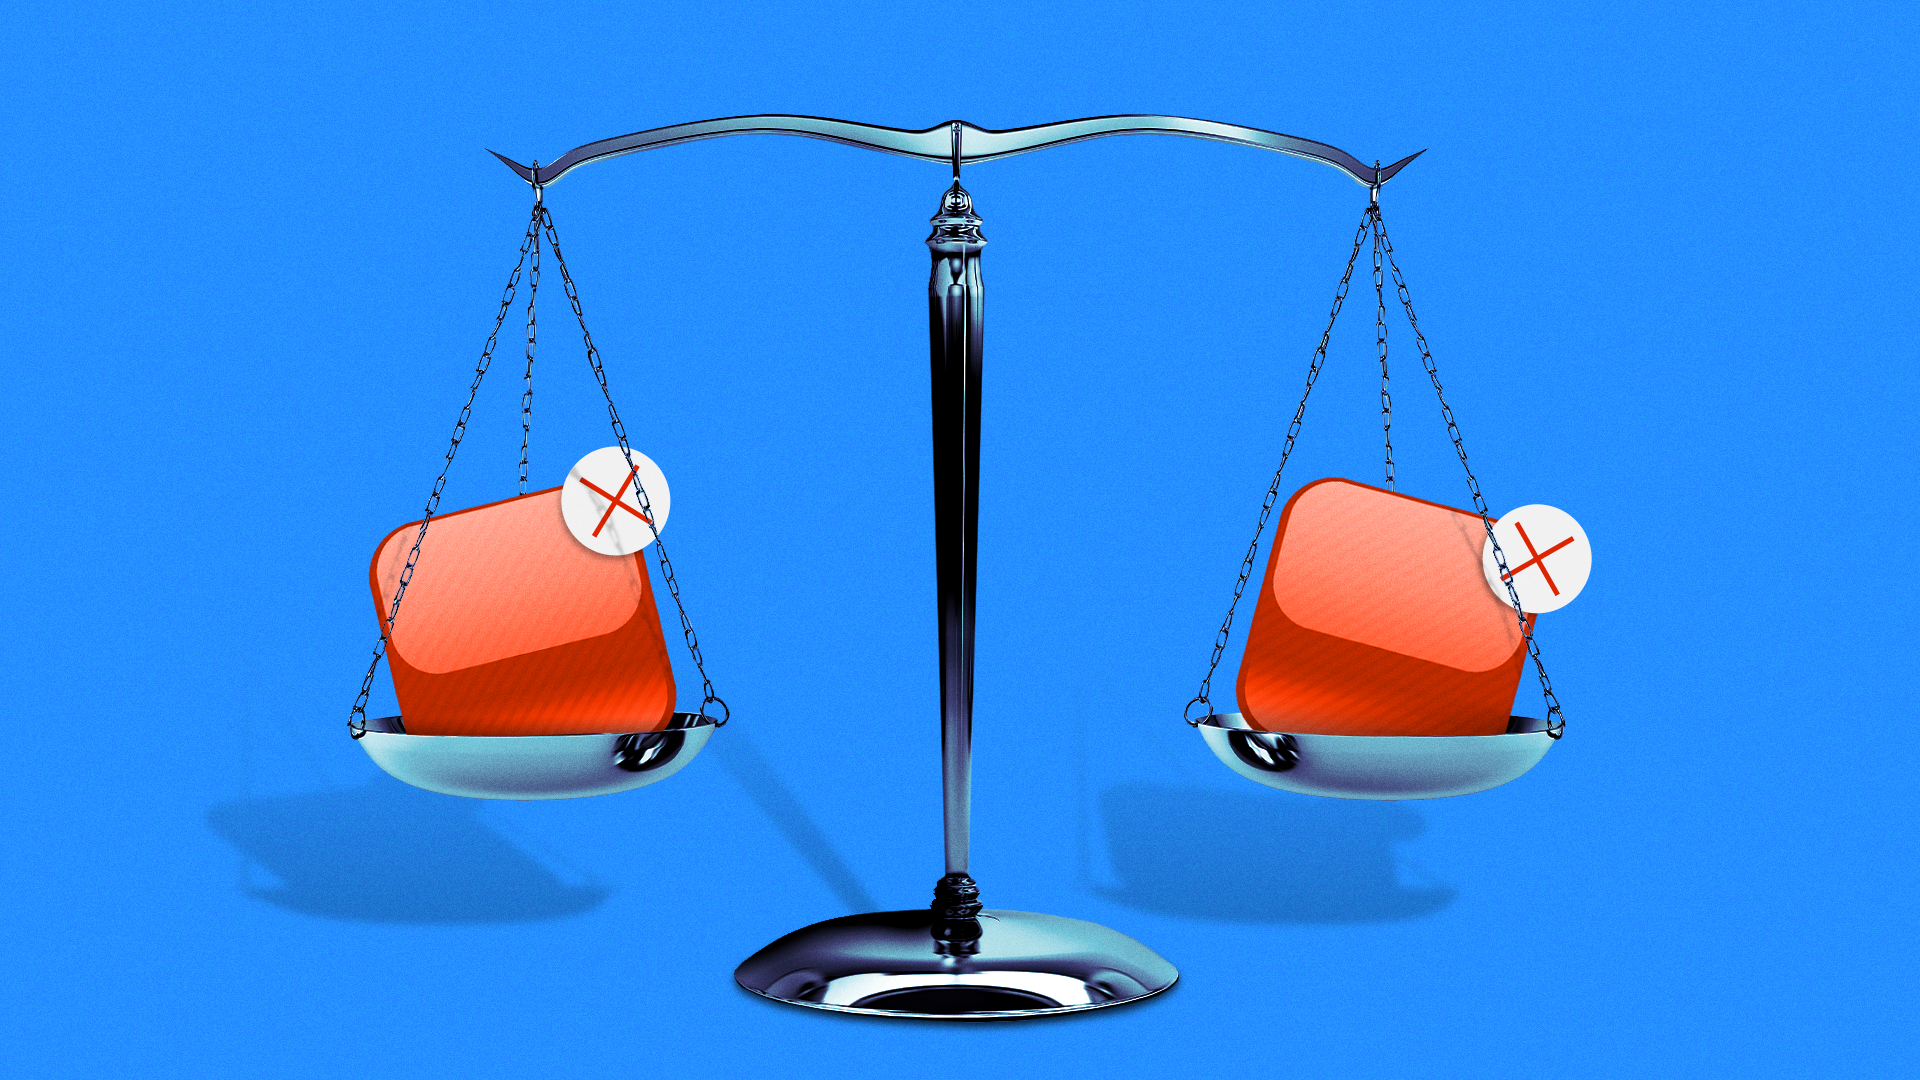 Illustration of scales of justice holding apps with the deleted X